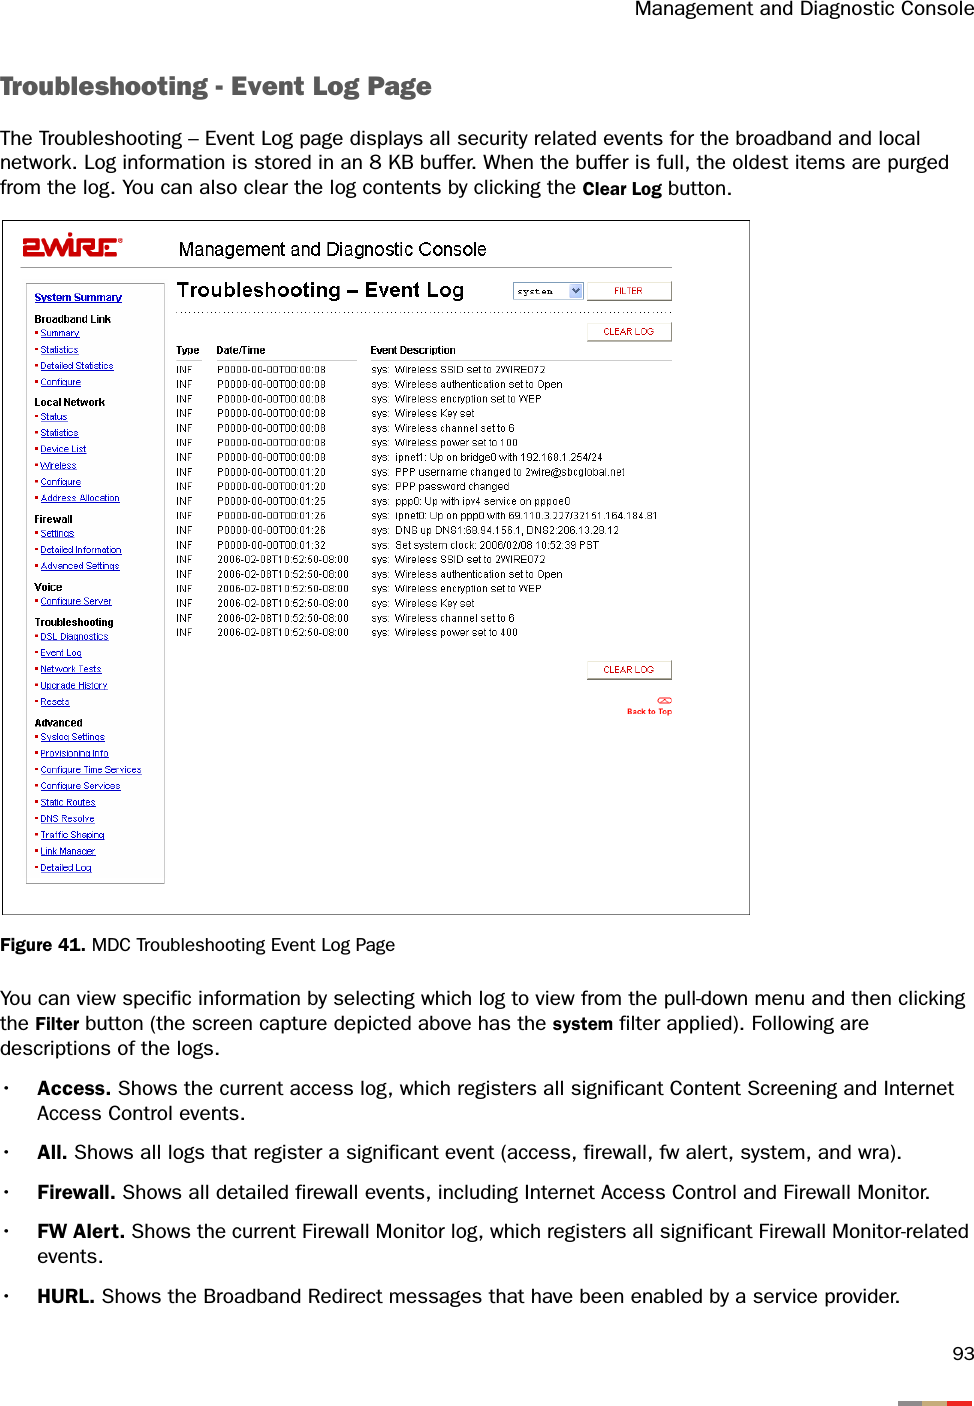 Management and Diagnostic Console93Troubleshooting - Event Log PageThe Troubleshooting – Event Log page displays all security related events for the broadband and local network. Log information is stored in an 8 KB buffer. When the buffer is full, the oldest items are purged from the log. You can also clear the log contents by clicking the Clear Log button. Figure 41. MDC Troubleshooting Event Log PageYou can view specific information by selecting which log to view from the pull-down menu and then clicking the Filter button (the screen capture depicted above has the system filter applied). Following are descriptions of the logs.•Access. Shows the current access log, which registers all significant Content Screening and Internet Access Control events.•All. Shows all logs that register a significant event (access, firewall, fw alert, system, and wra).•Firewall. Shows all detailed firewall events, including Internet Access Control and Firewall Monitor.•FW Alert. Shows the current Firewall Monitor log, which registers all significant Firewall Monitor-related events.•HURL. Shows the Broadband Redirect messages that have been enabled by a service provider.